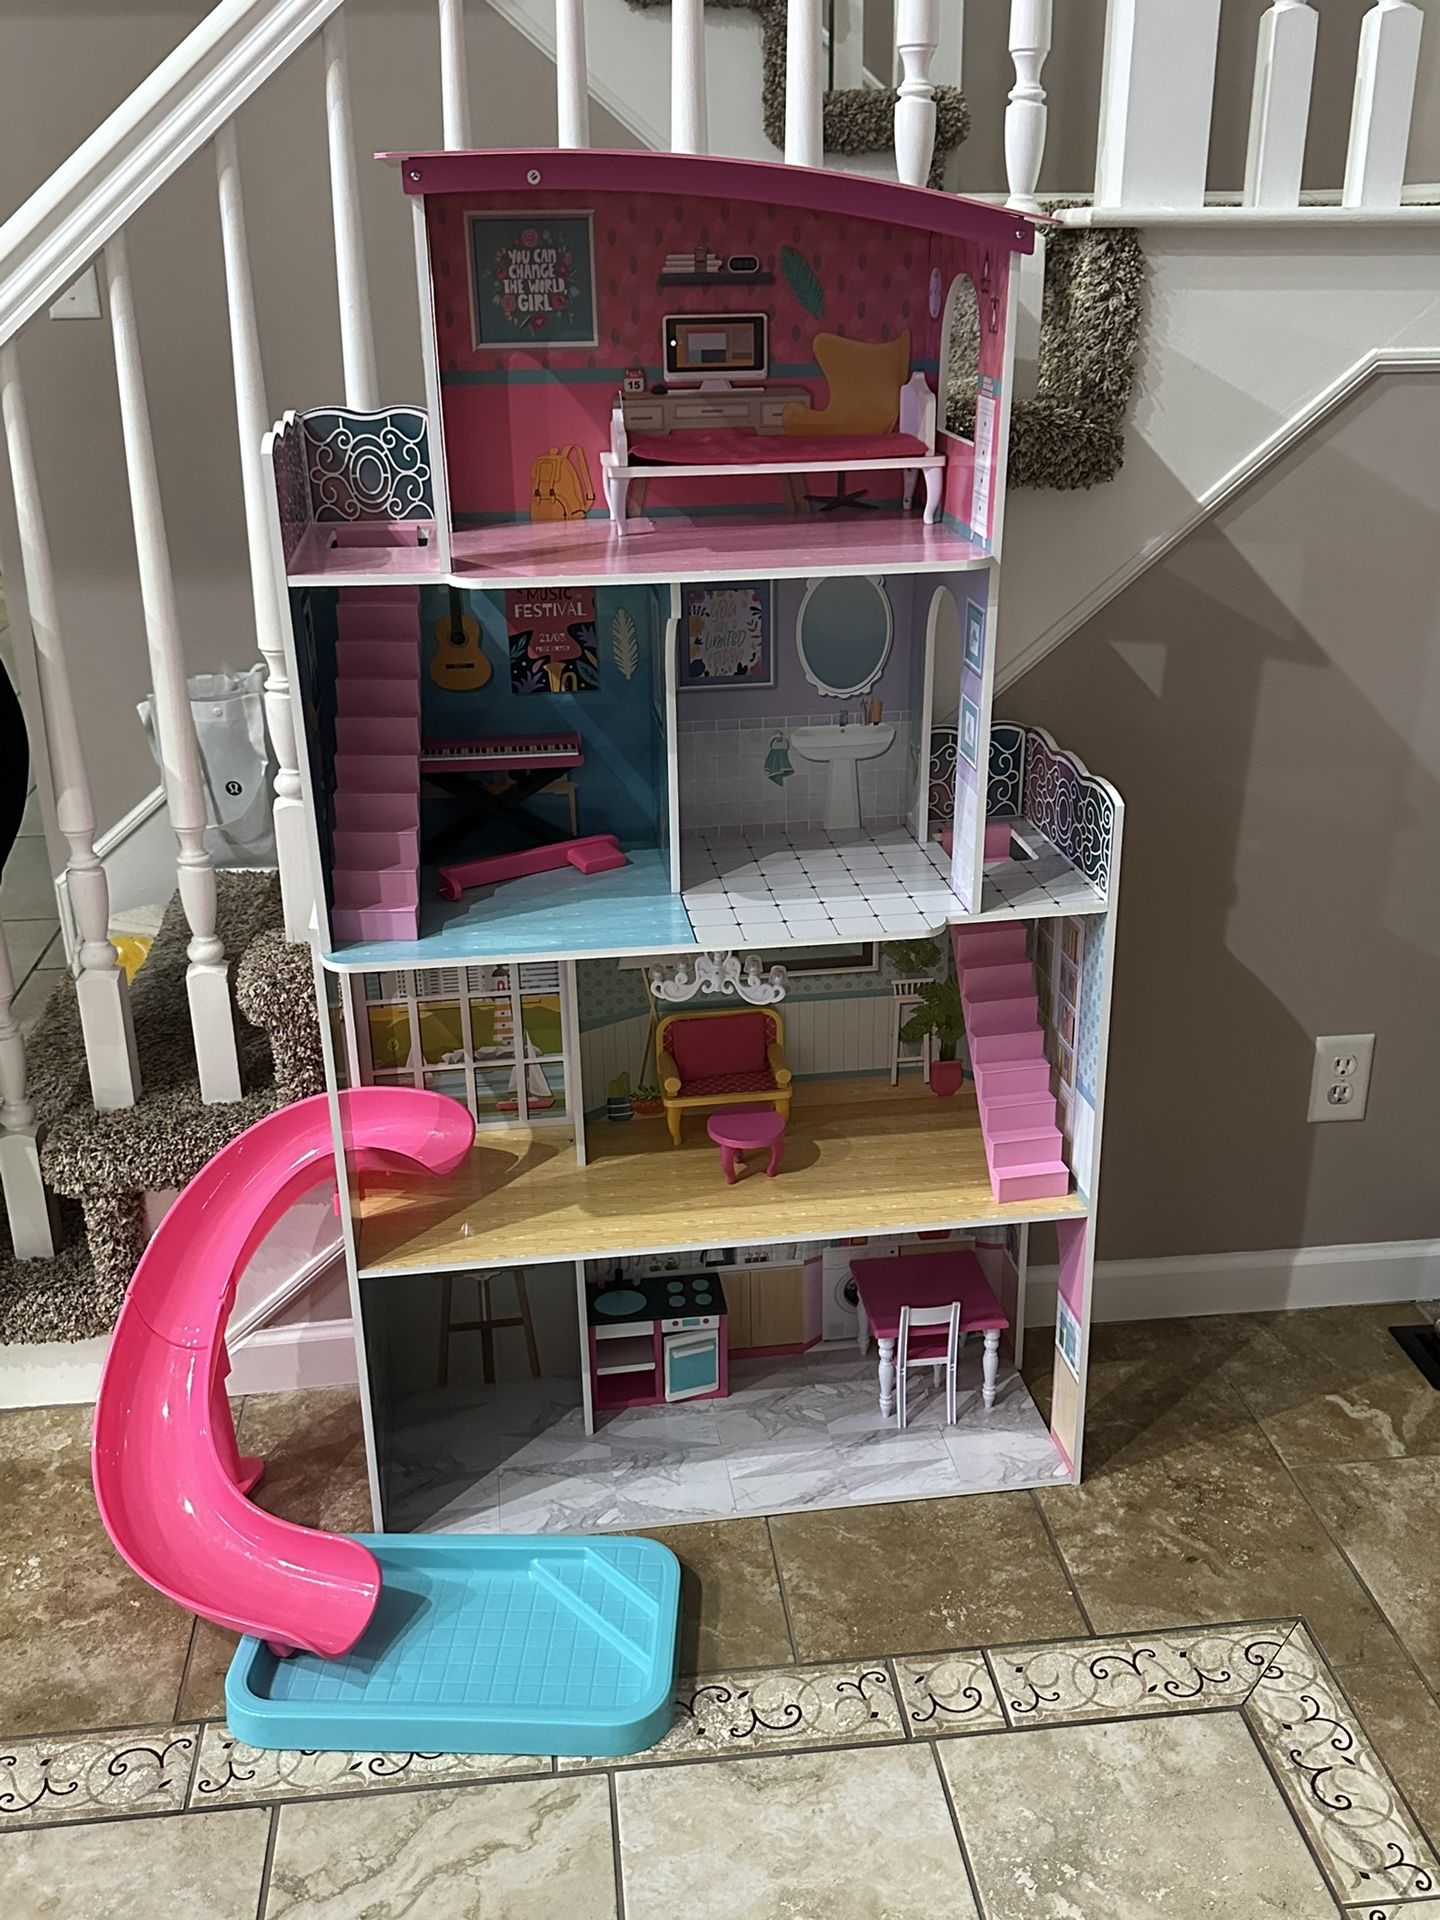 Brand New Doll House 